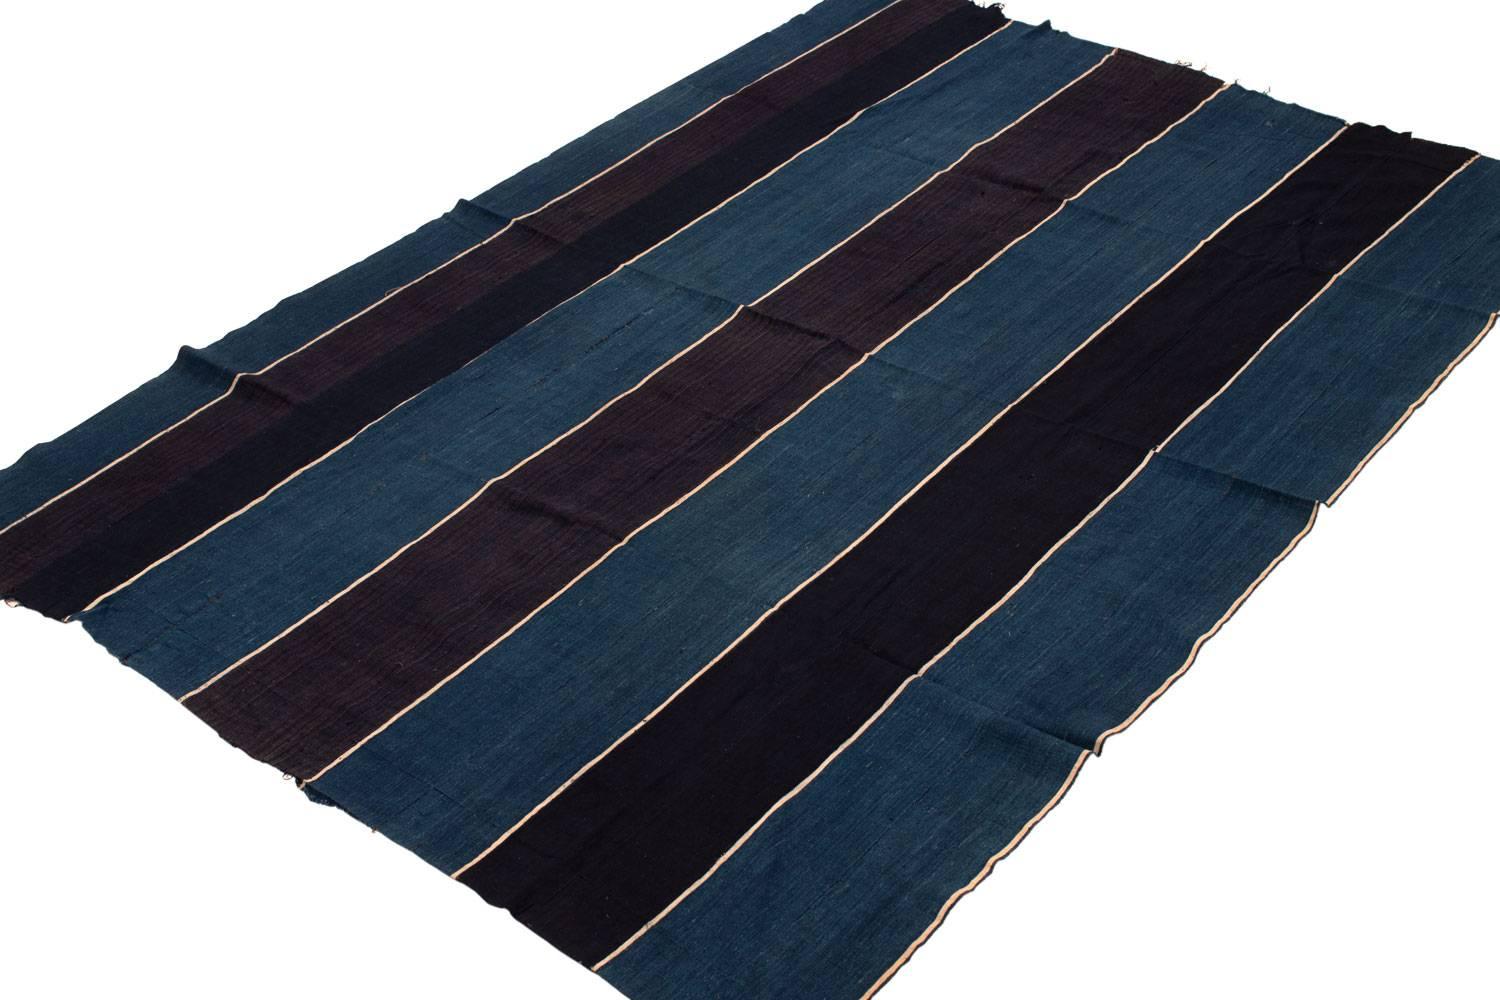 This is an old prestigious wrap from the Yoruba Tribe of Nigeria. Made with superb indigo dye and native hand-spun cotton, it was owned by wealthy person of that tribe and probably only worn on special occasions. It has a strong, tight weave of very